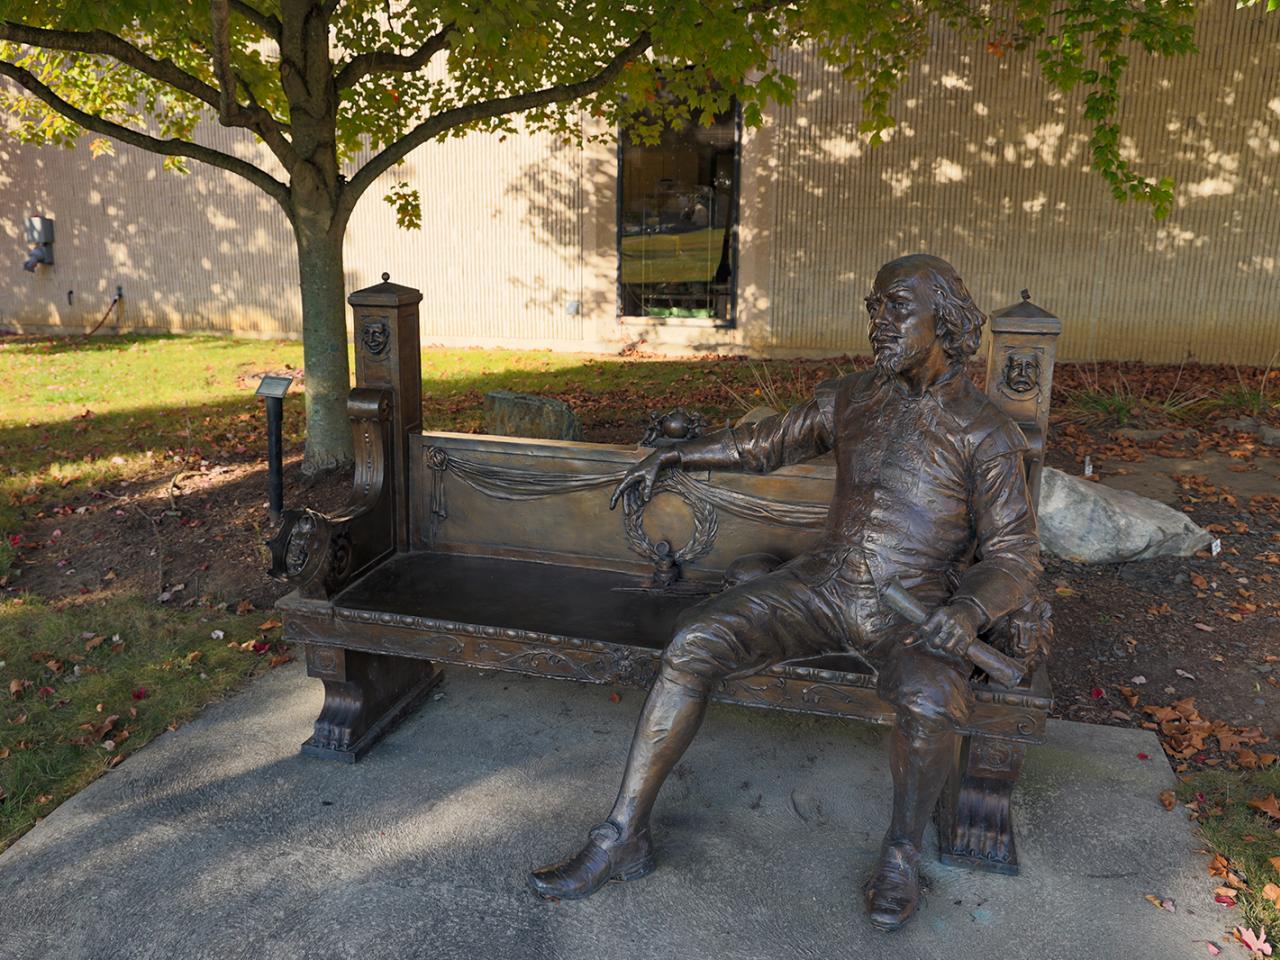 A bronze statue of William Shakespeare seated on a bench.